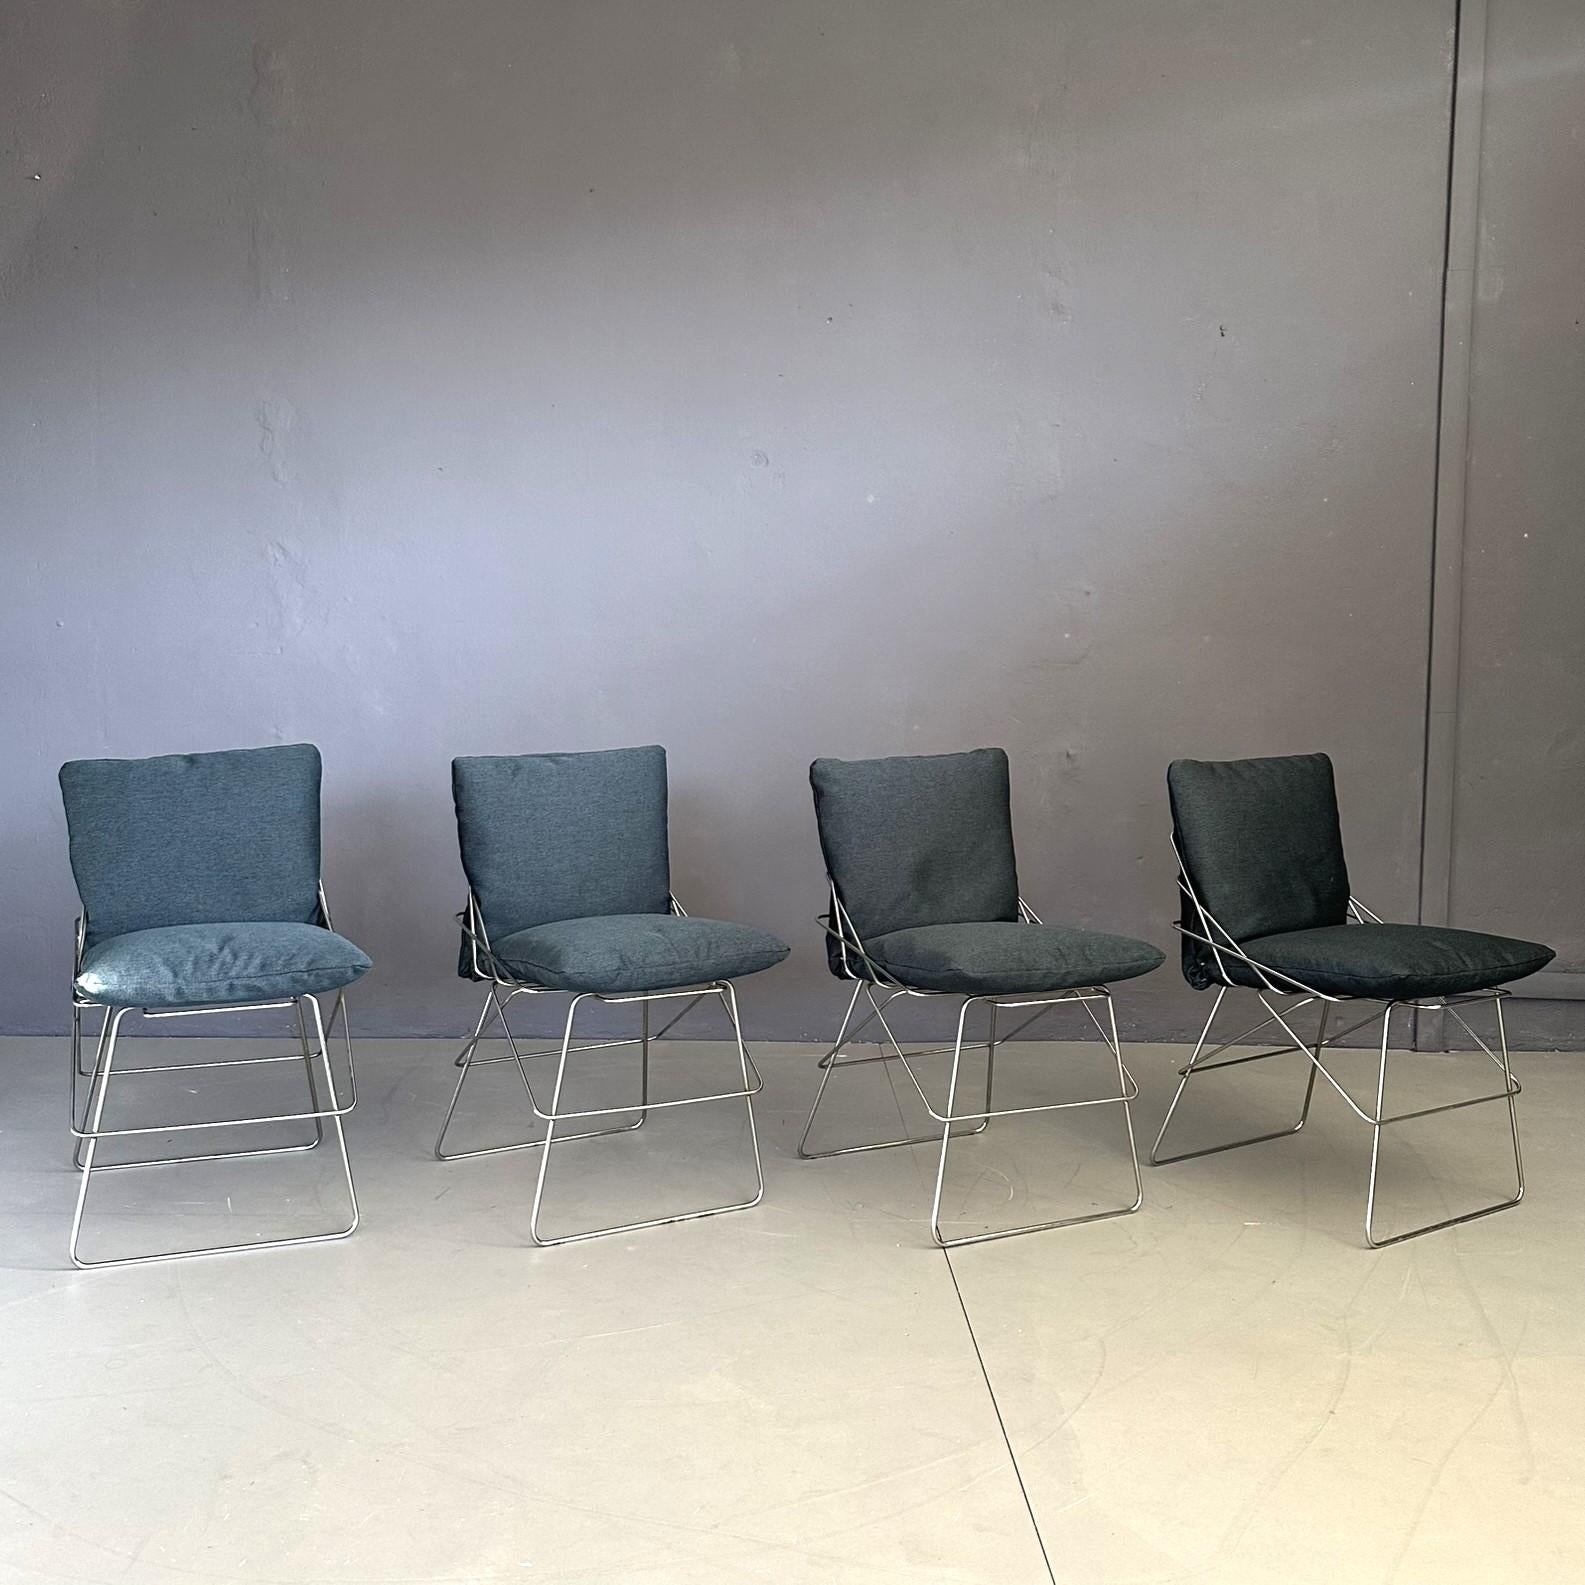 
Set of four chairs model SOF SOF design by Enzo Mari, for Daride 70s. Chromed metal rod structure, with seat and backrest upholstered in blue fabric.
Seat that summarizes the essentiality and elegance of Enzo Mari's design. Created by Driade in